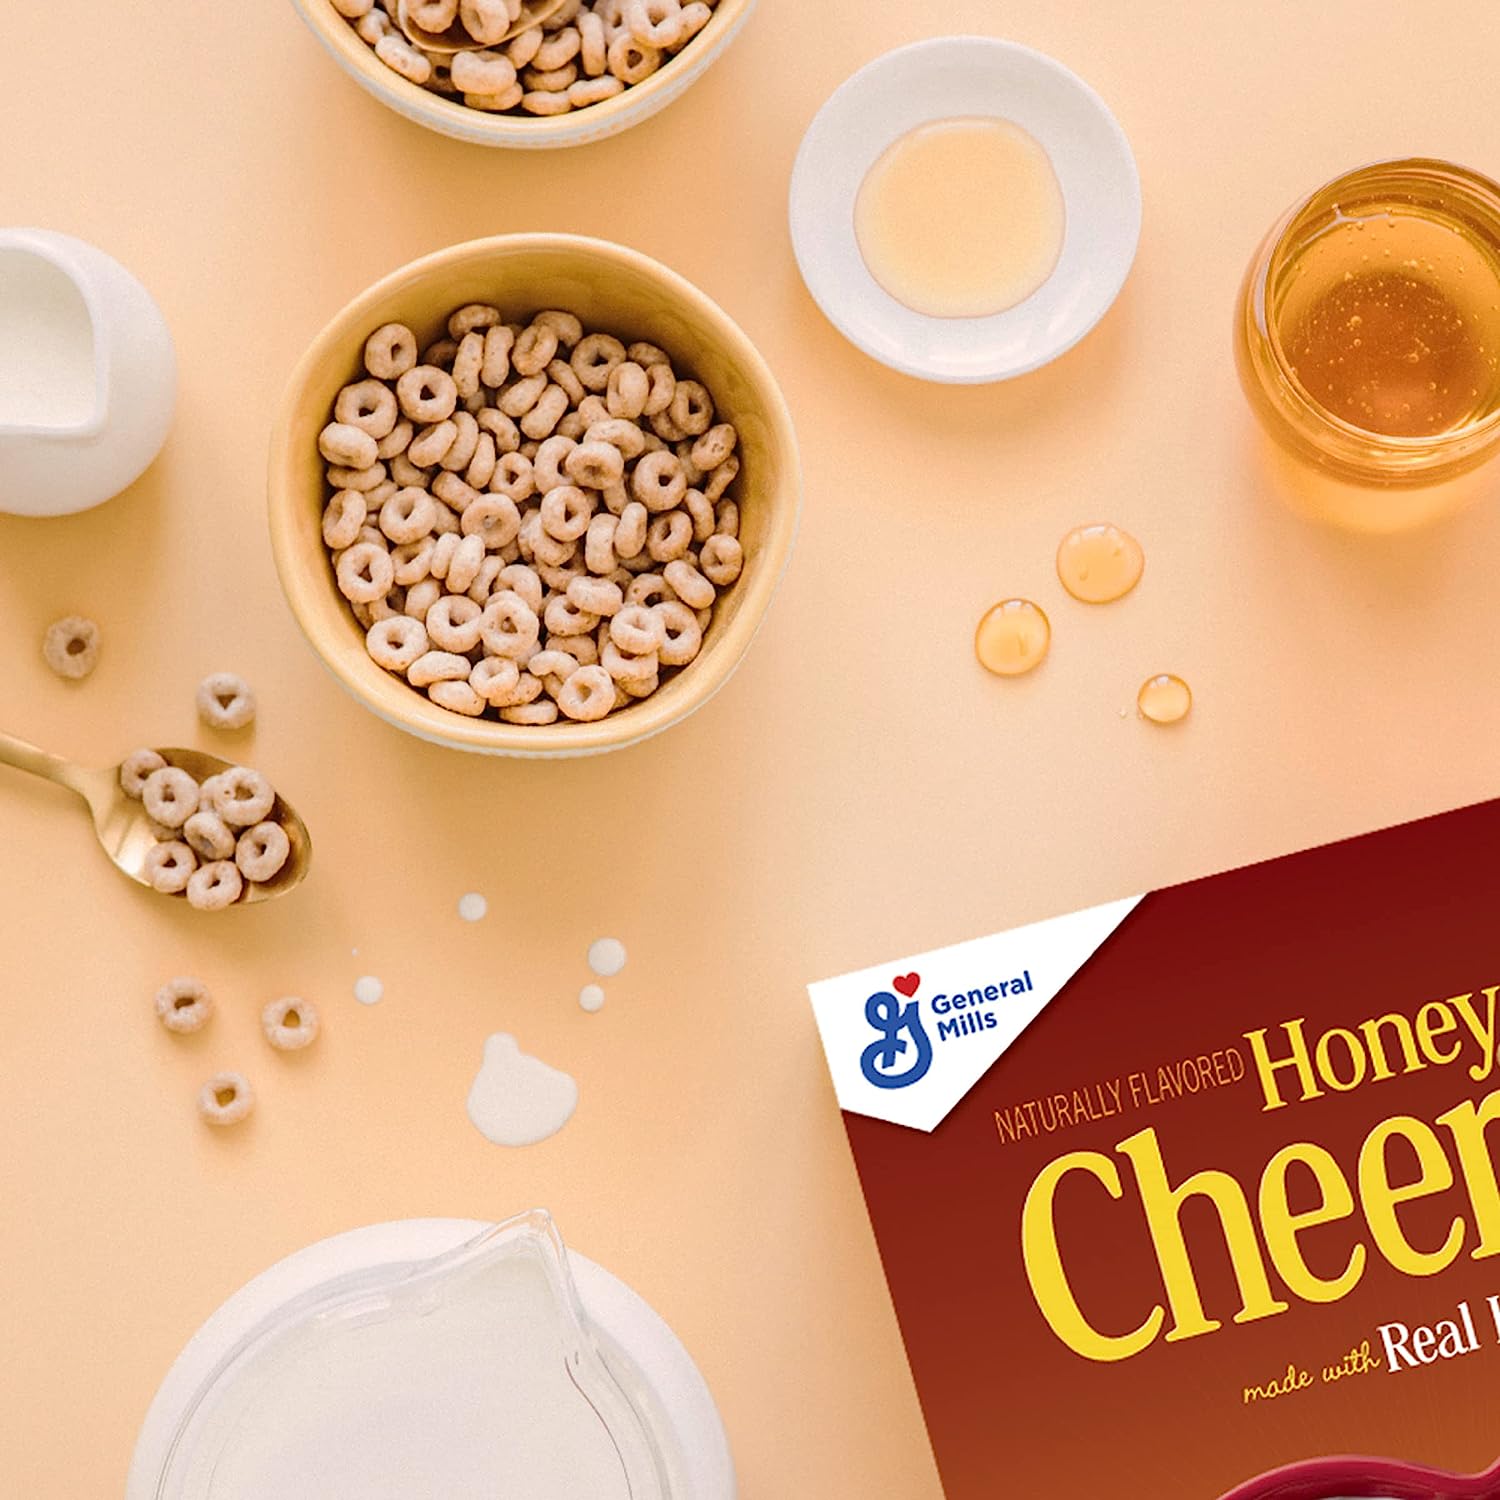 Honey Nut Cheerios Cereal, Limited Edition Happy Heart Shapes, Heart Healthy Cereal With Whole Grain Oats, Large Size, 15.4 oz